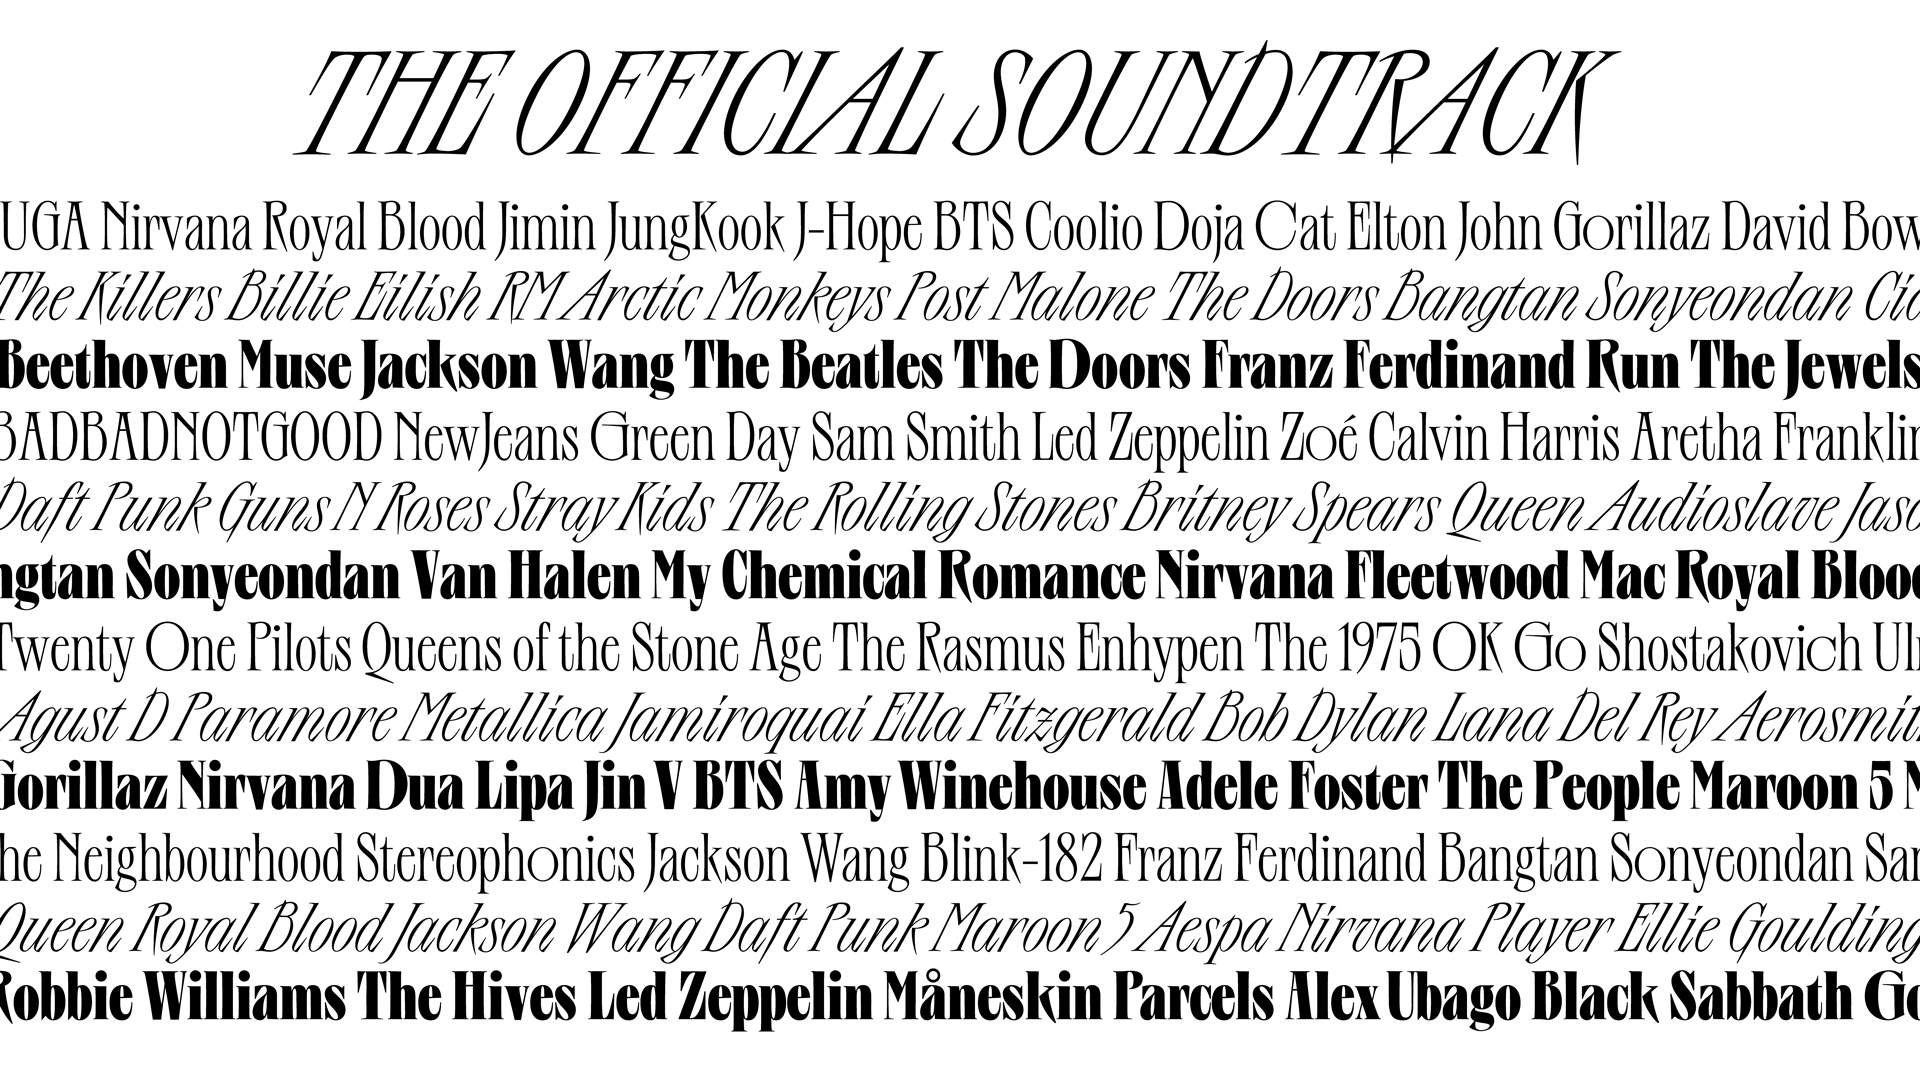 The official Soundtrack list with the name of various artists and group names set in Hell.Inc.